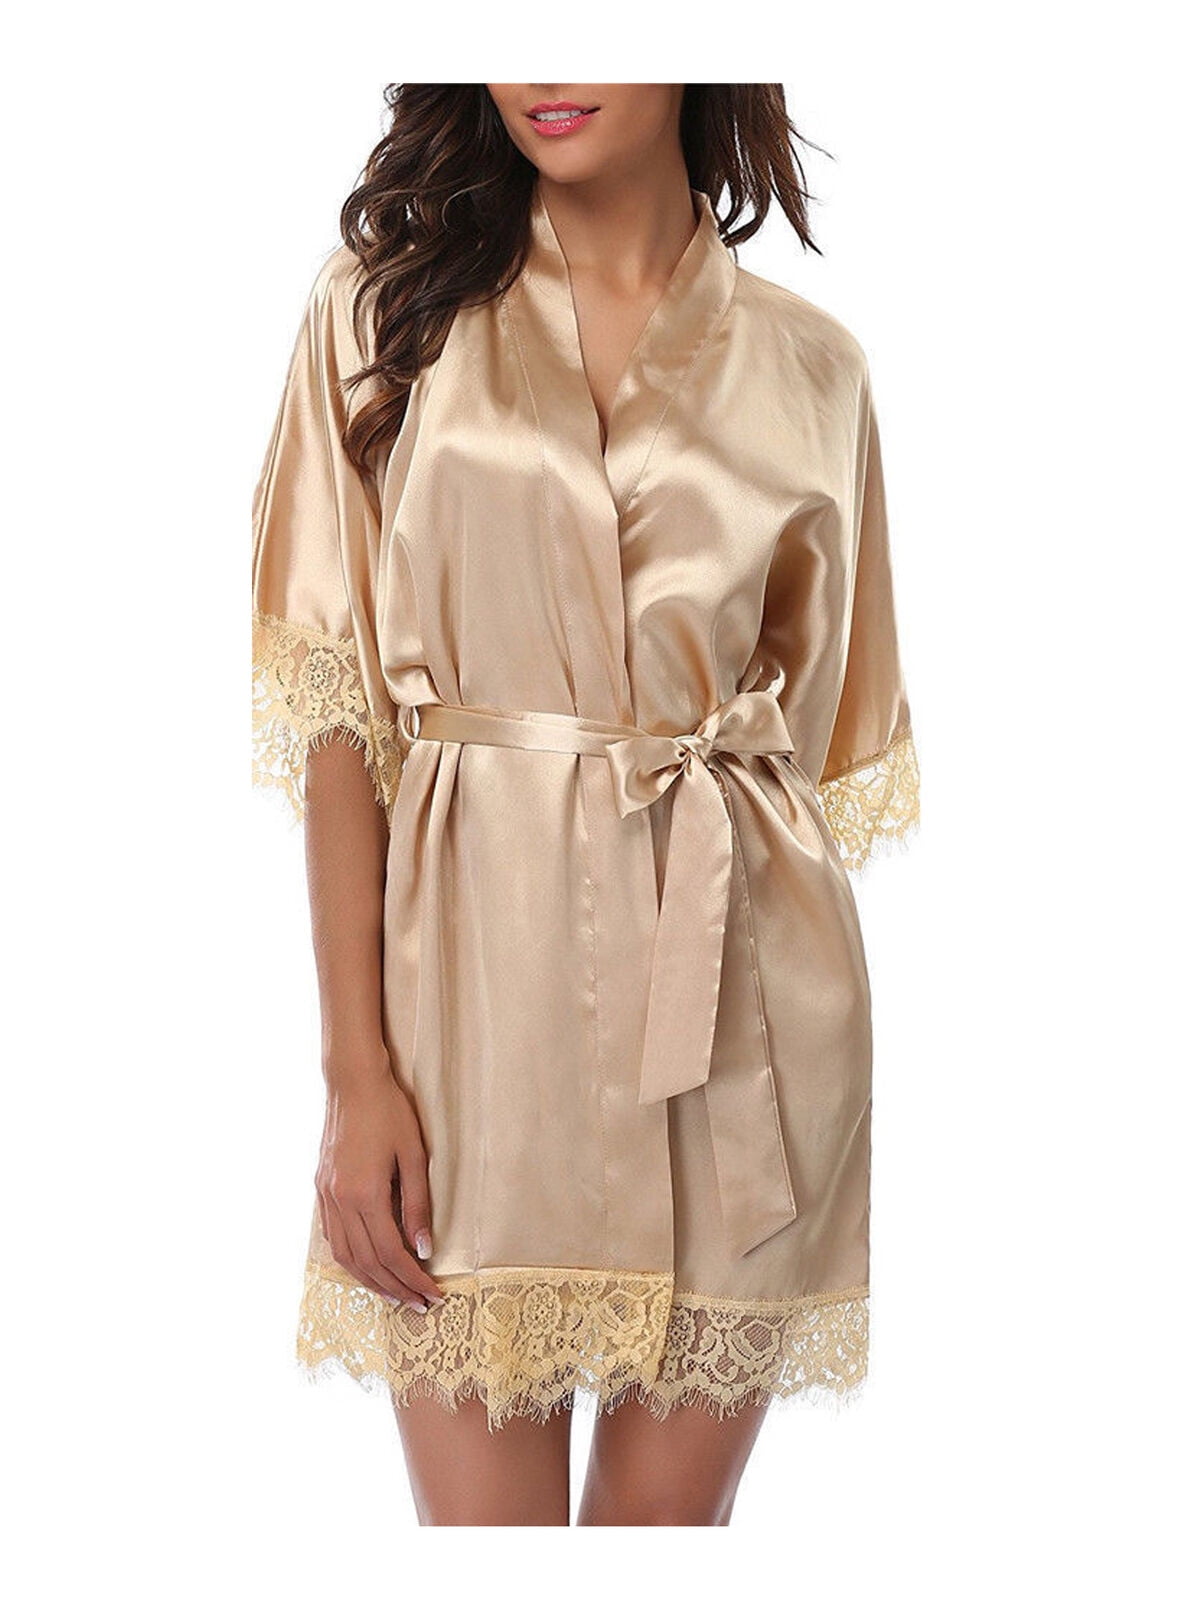 Details about   Women's Short Satin Bridesmaid Robes Floral Silky Bride Robes Getting Ready